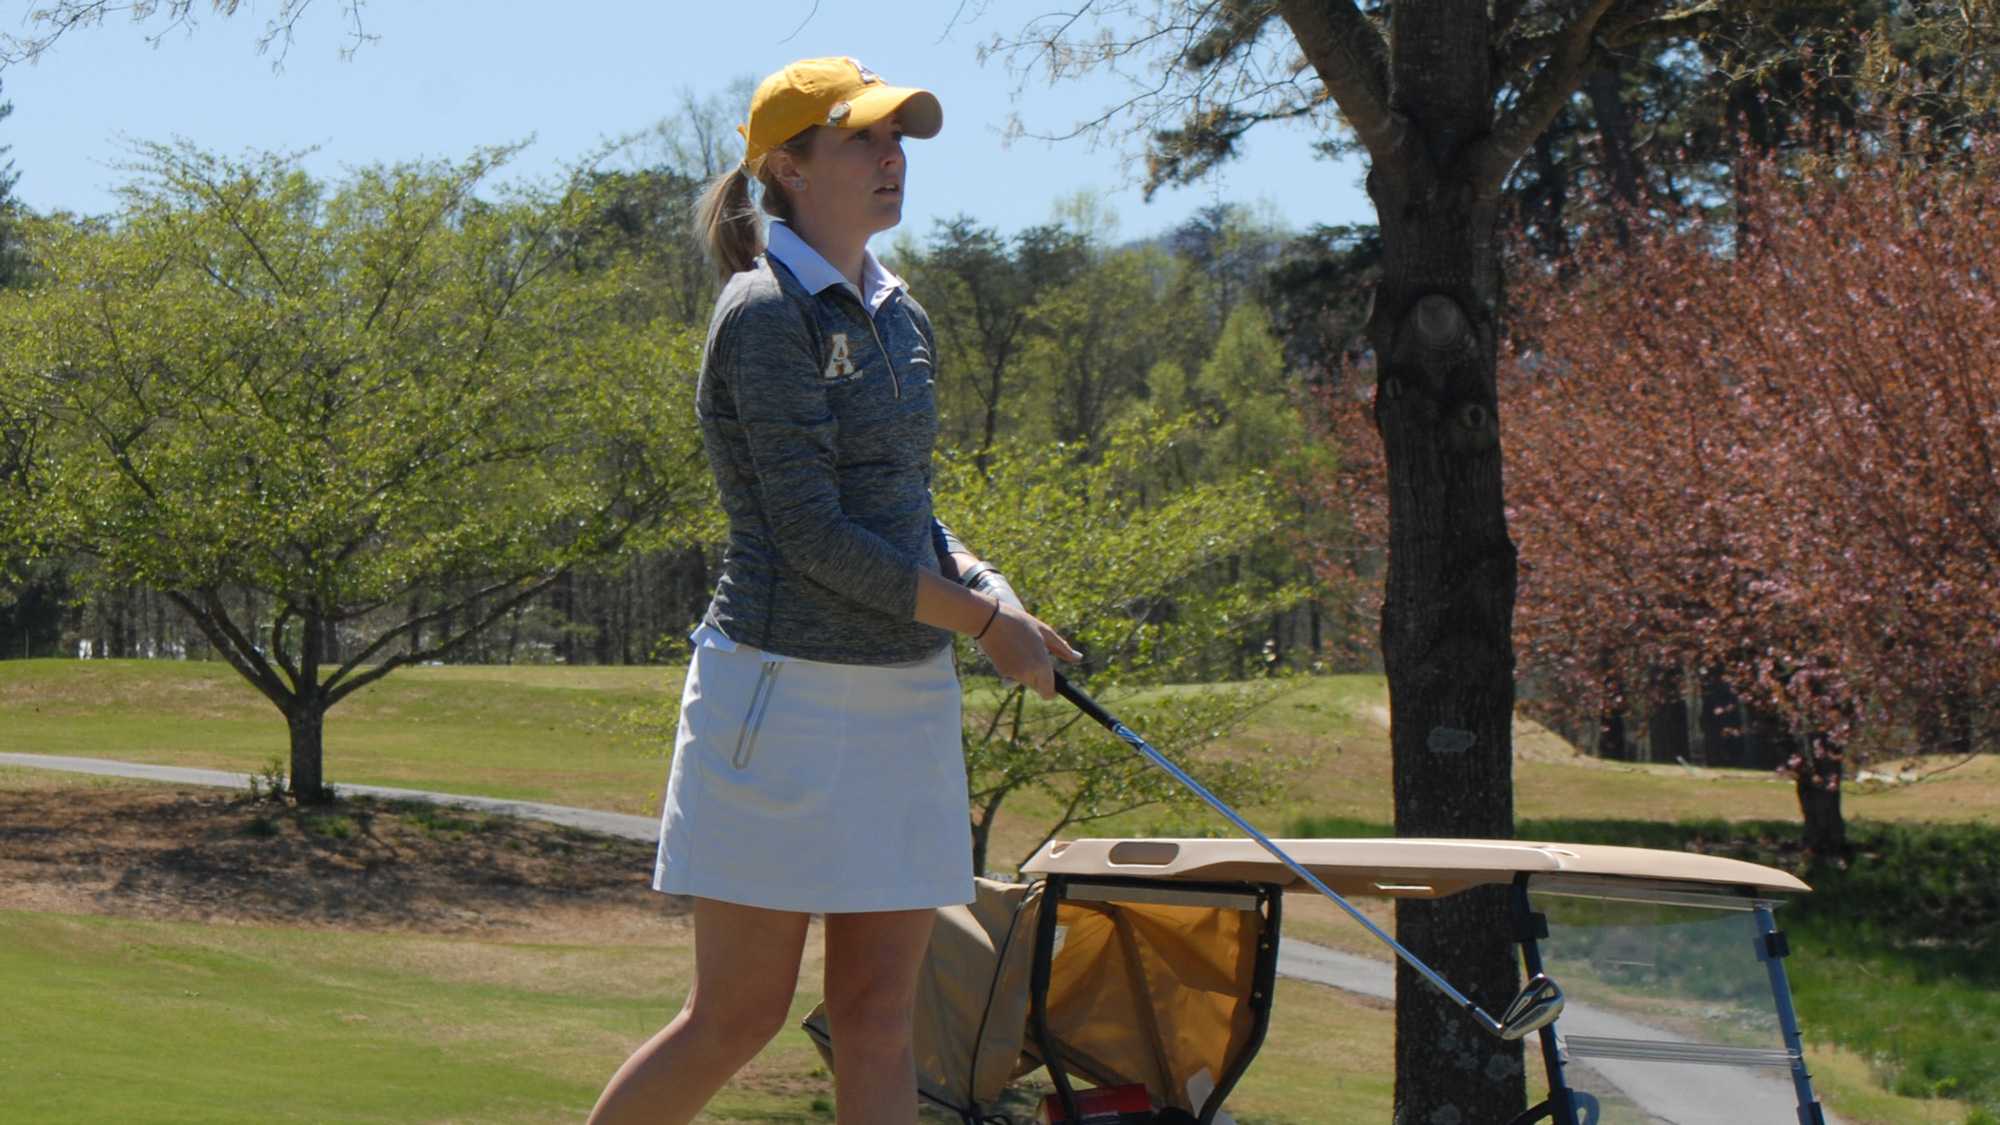 Stinson watches her shot during tournament play. Photo courtesy App State Athletics.